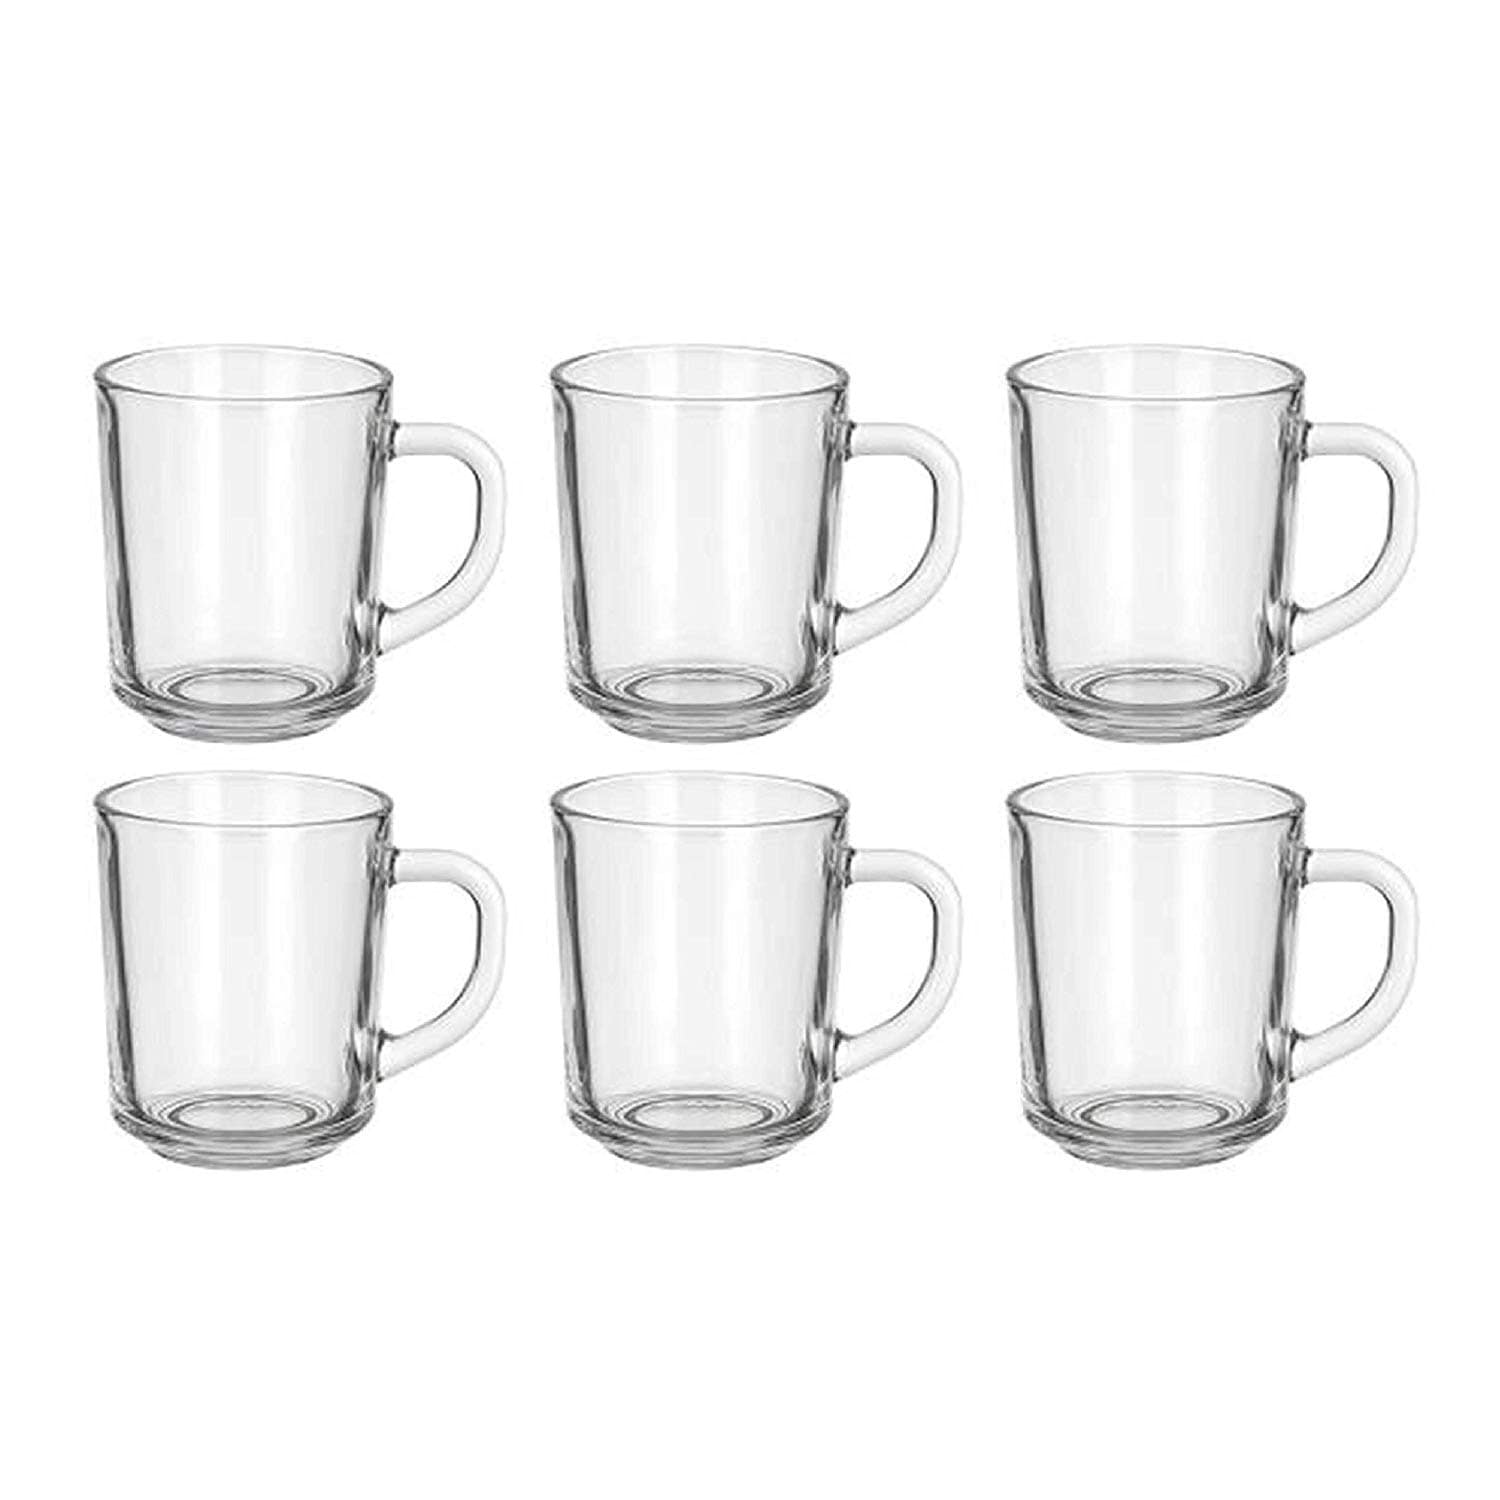 Didaey 8 Pack 8 oz Glass Coffee Mugs Clear Insulated Glass Espresso Coffee  Cups with Handle Cafe Mug…See more Didaey 8 Pack 8 oz Glass Coffee Mugs